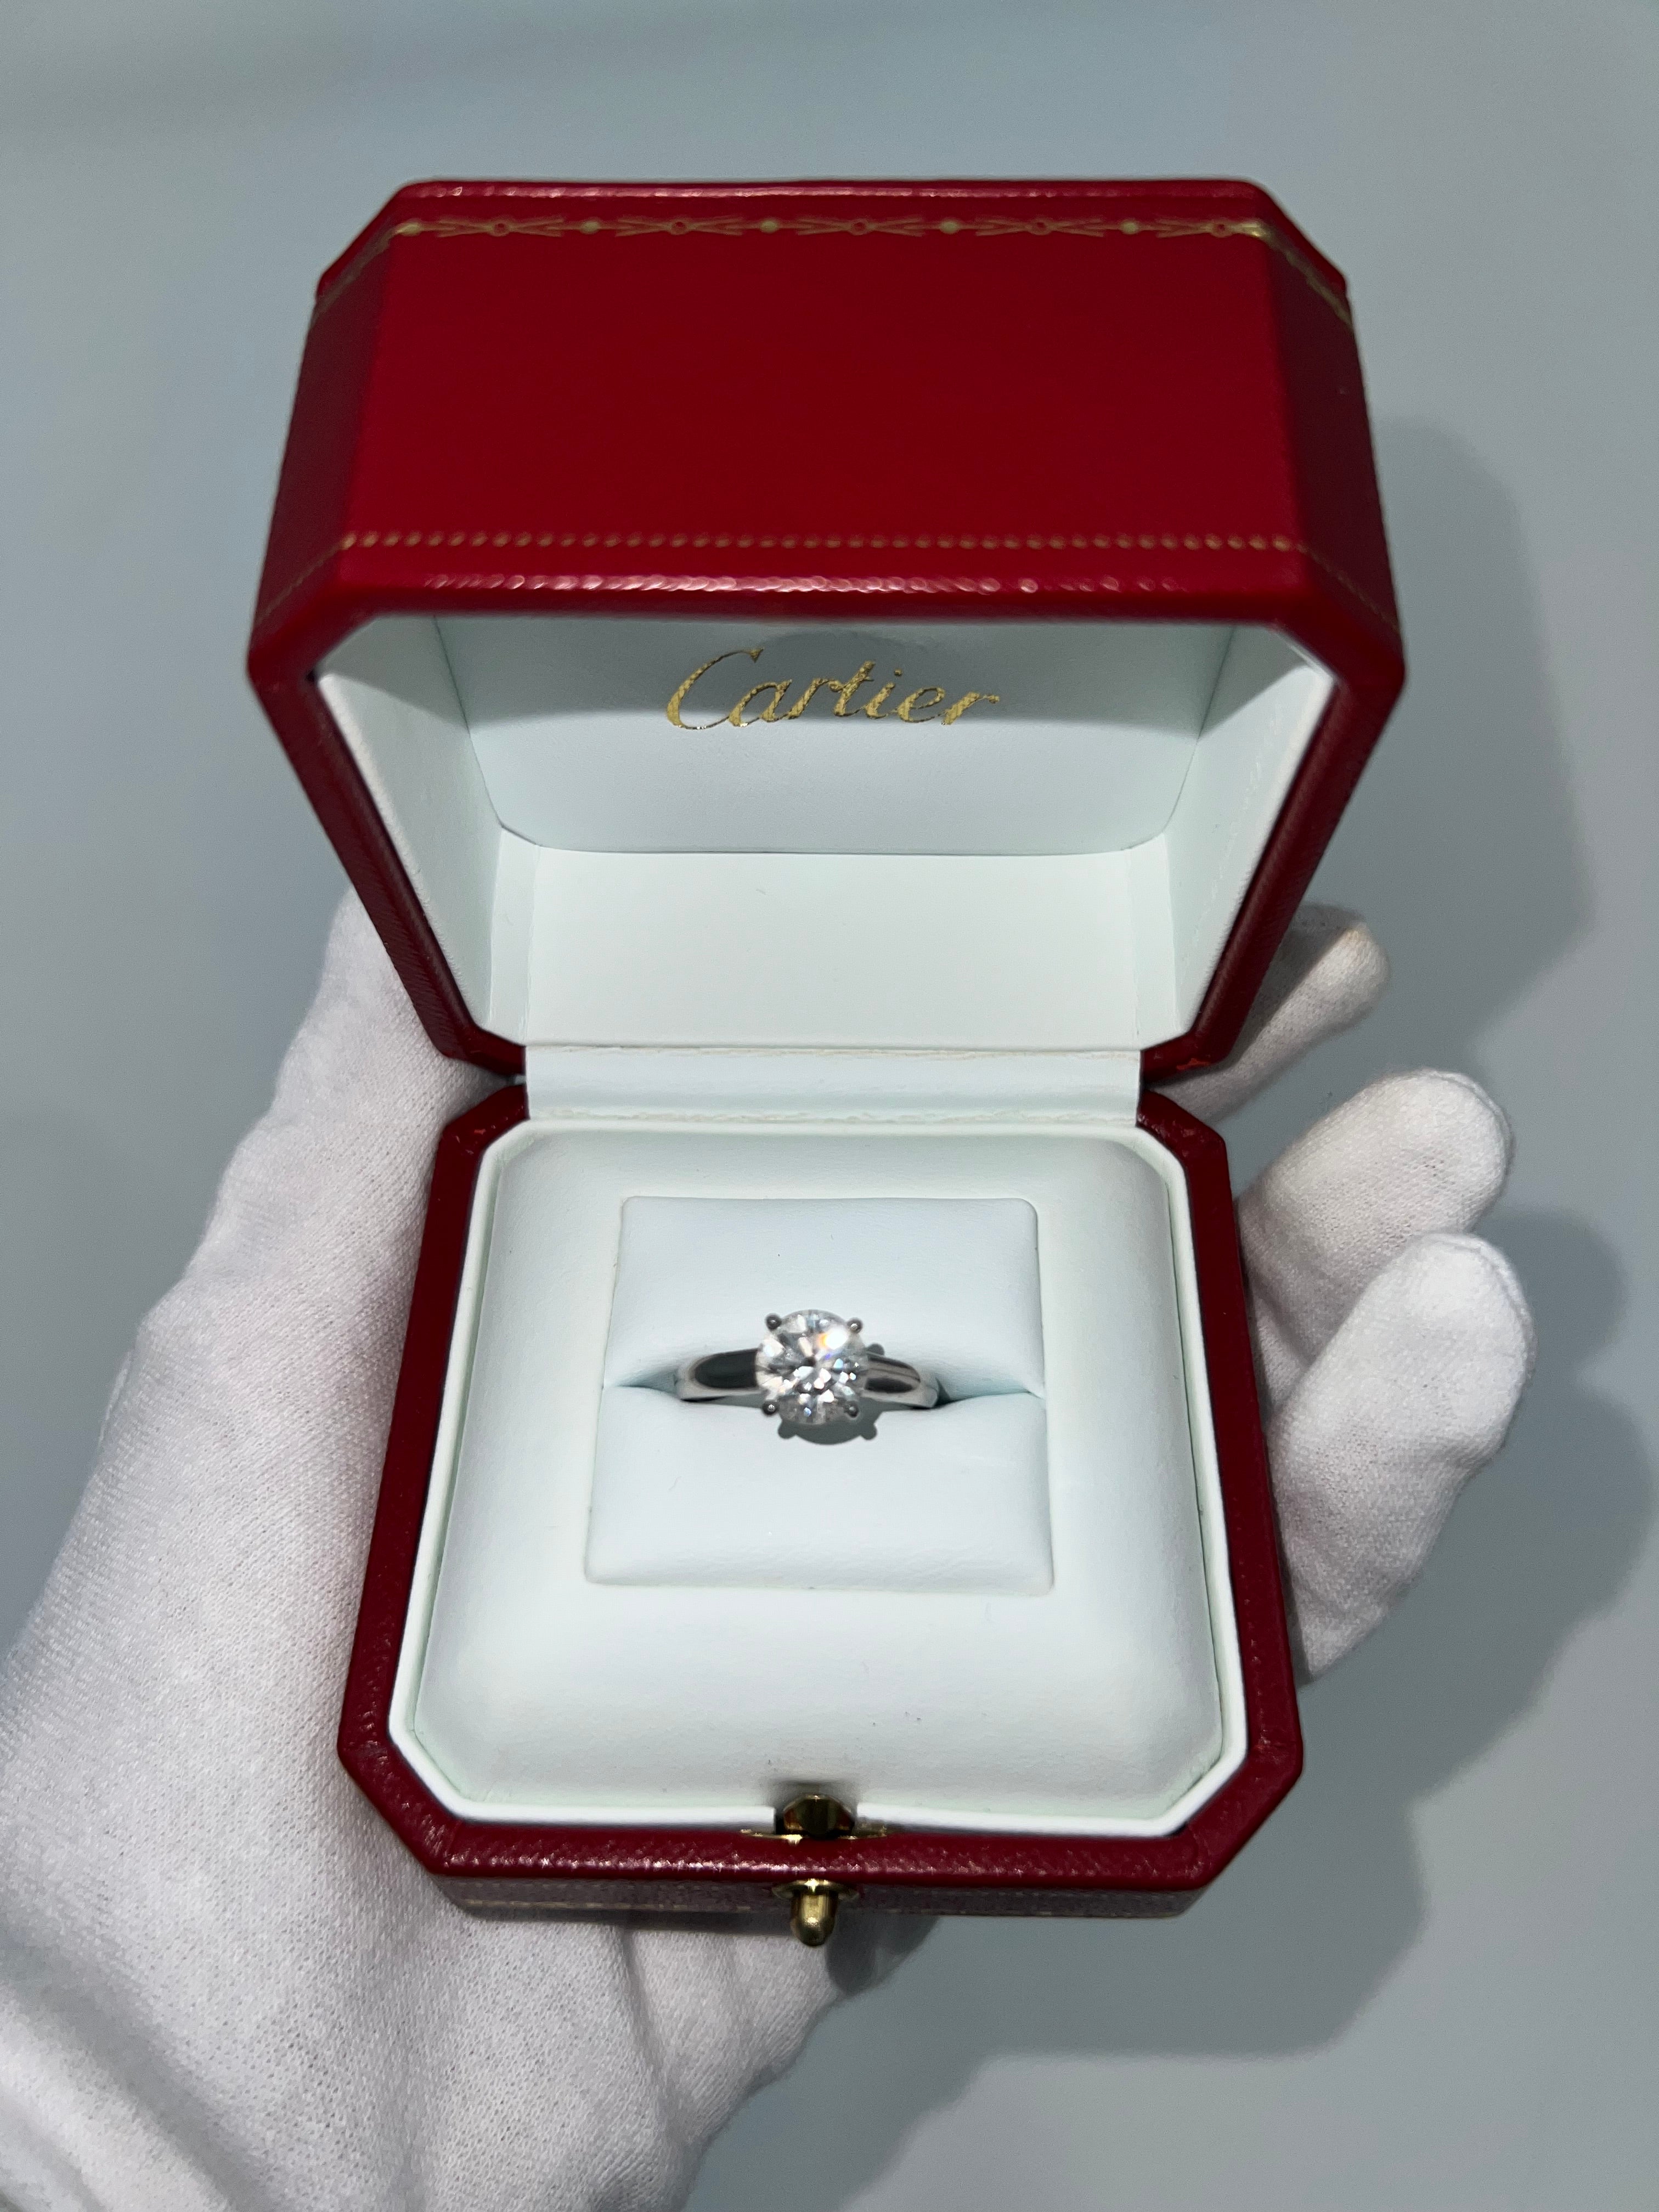 Pre-owned Cartier 1895 Platinum solitaire 2.18ct diamond engagement ring of VS1 clarity